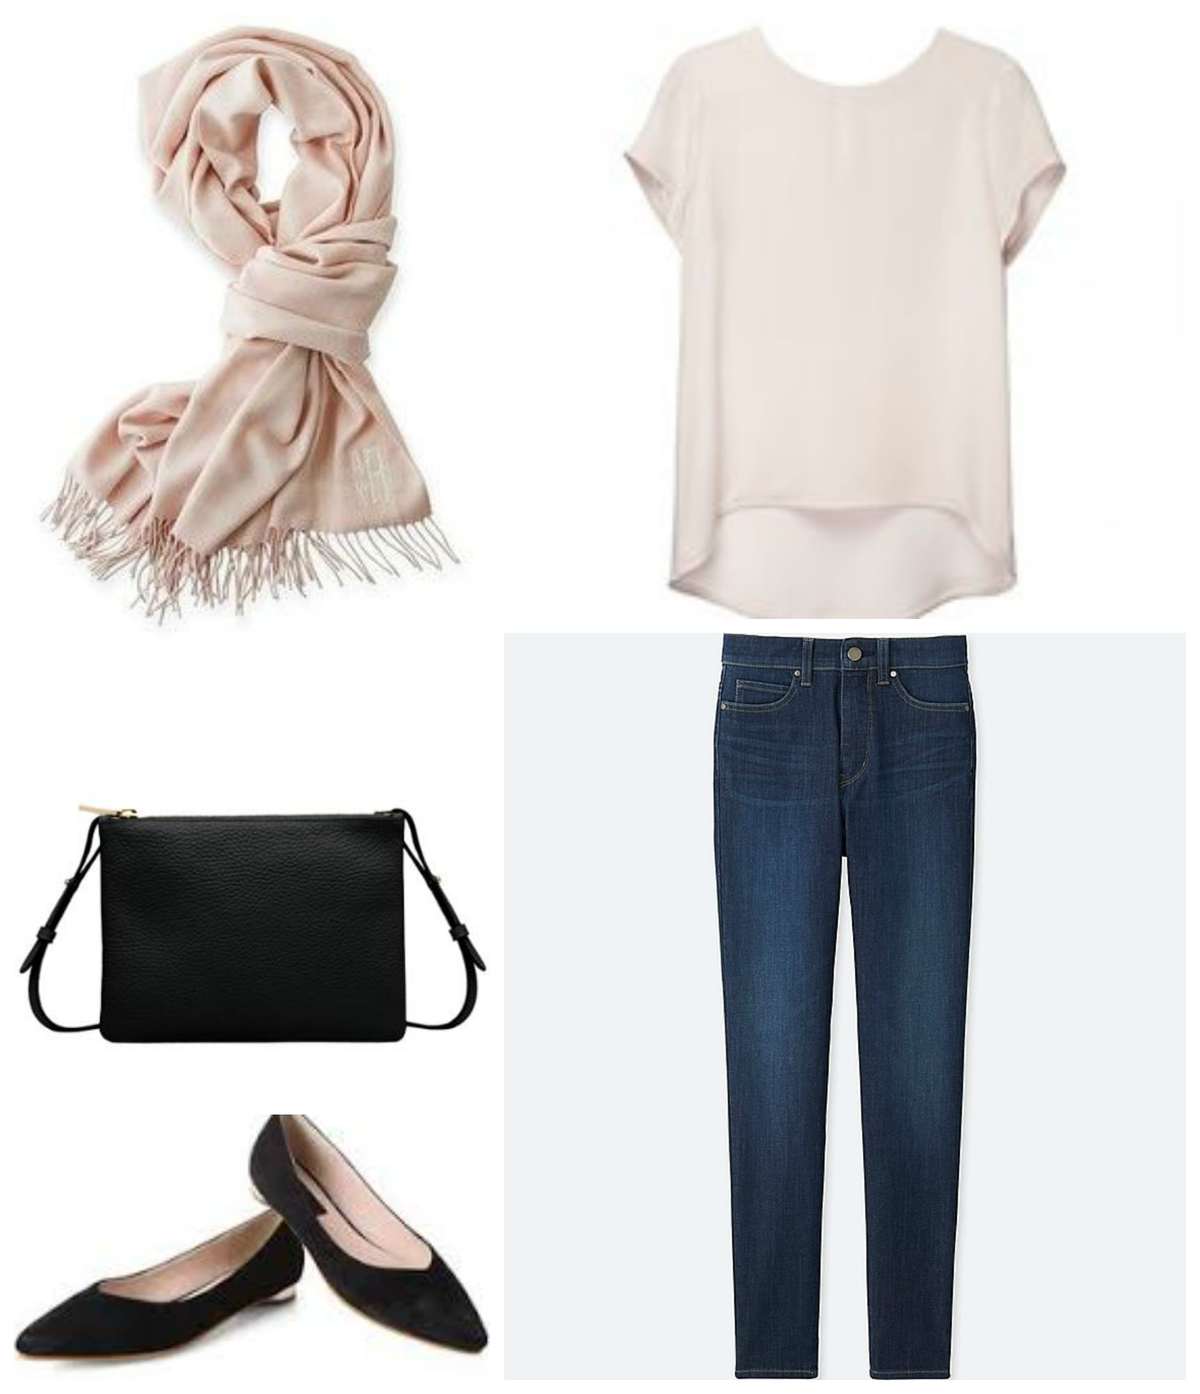 Blush colored silk t-shirt with dark ankle jeans, pointed toe flats, black leather slim crossbody bag, and blush colored pashmina.